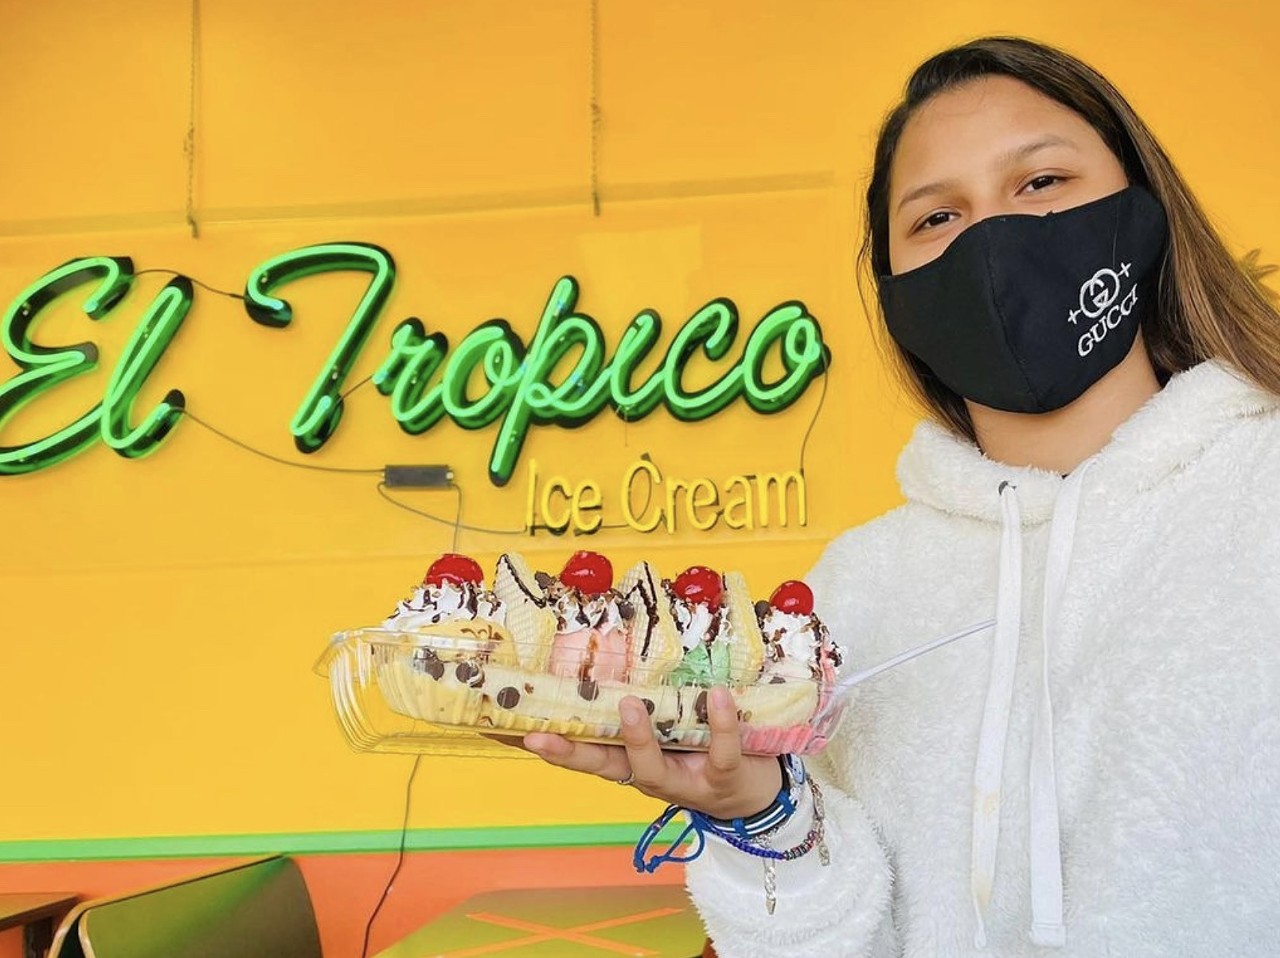 El Tropico
Multiple Locations, facebook.com/ElTropicoIceCream
Perfect for cold treats like ice cream, shaved ice and milkshakes, El Tropico is also a prime spot for bionicos and chilindrinas. The shop also has decked-out nachos made from Tostitos, Hot Cheetos and conchitas.